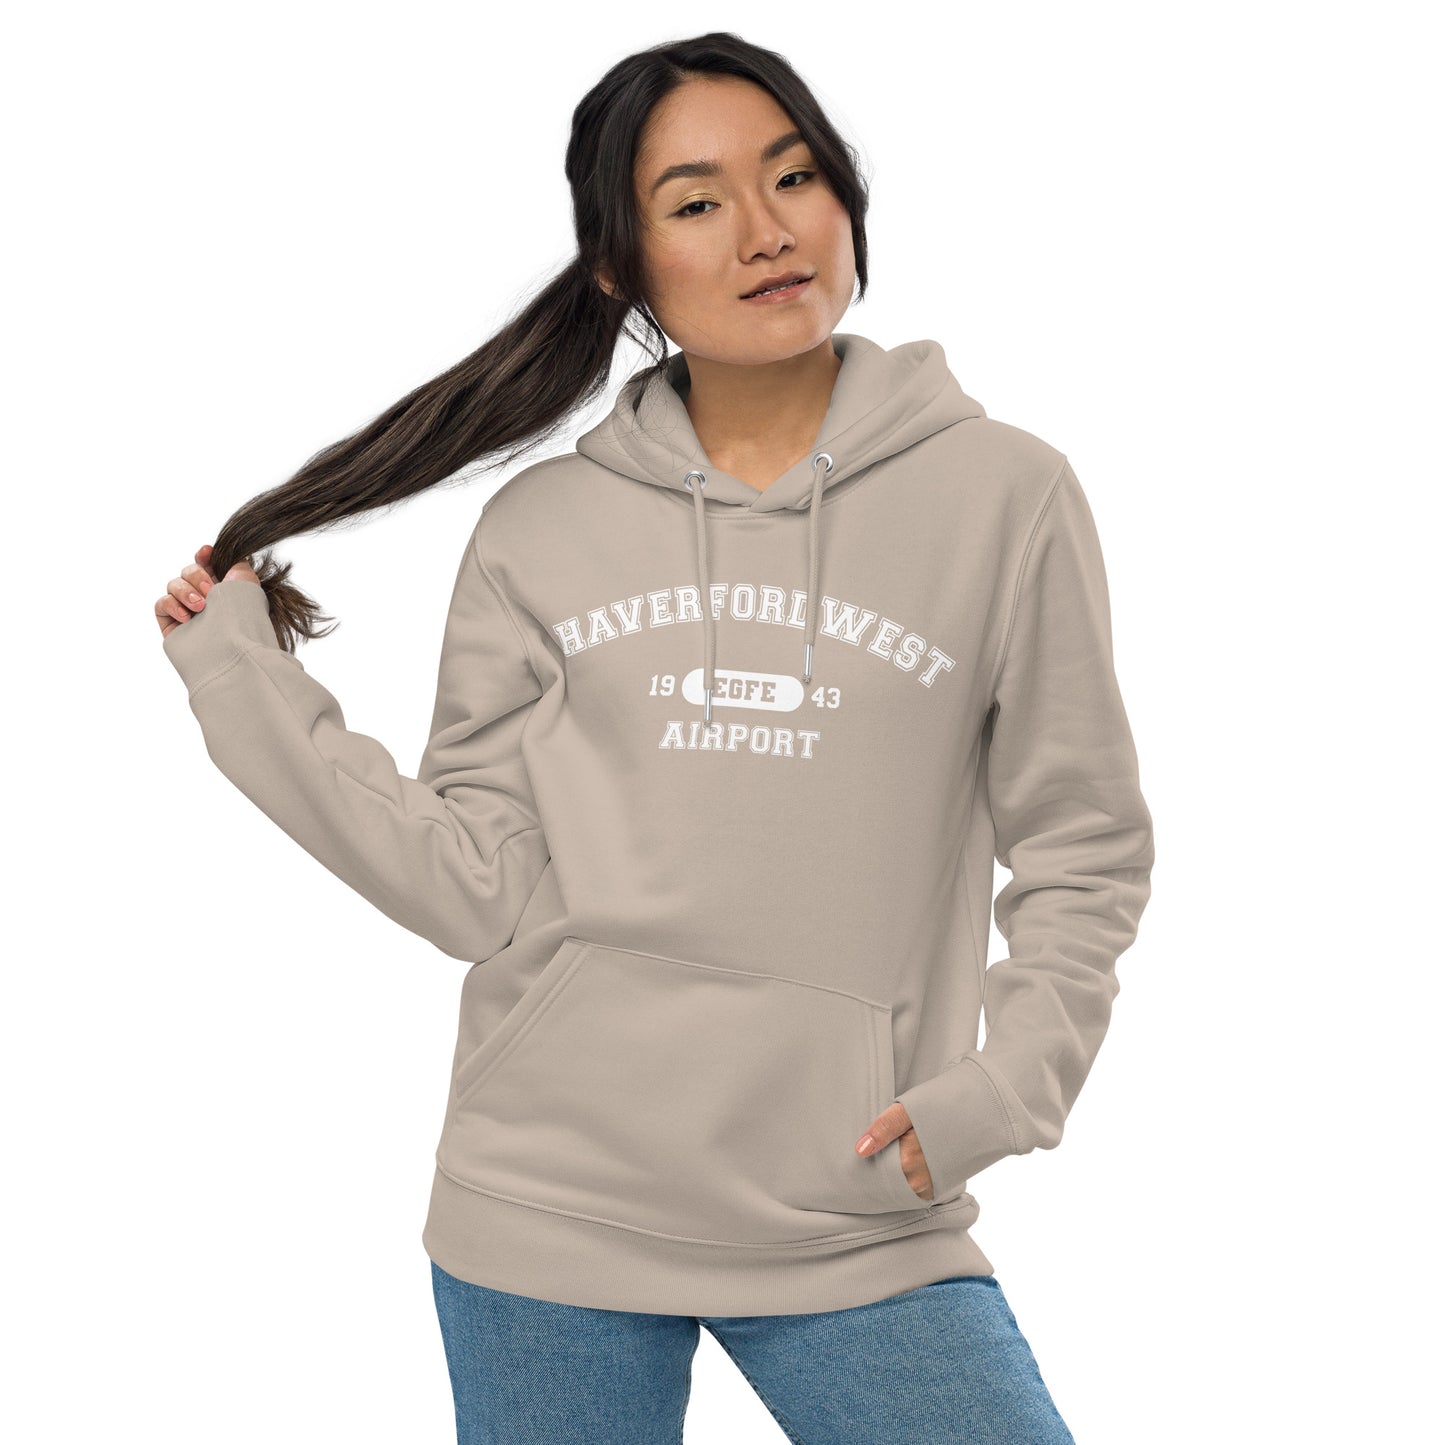 Haverfordwest Airport with ICAO code in collegiate style. Unisex essential eco hoodie.